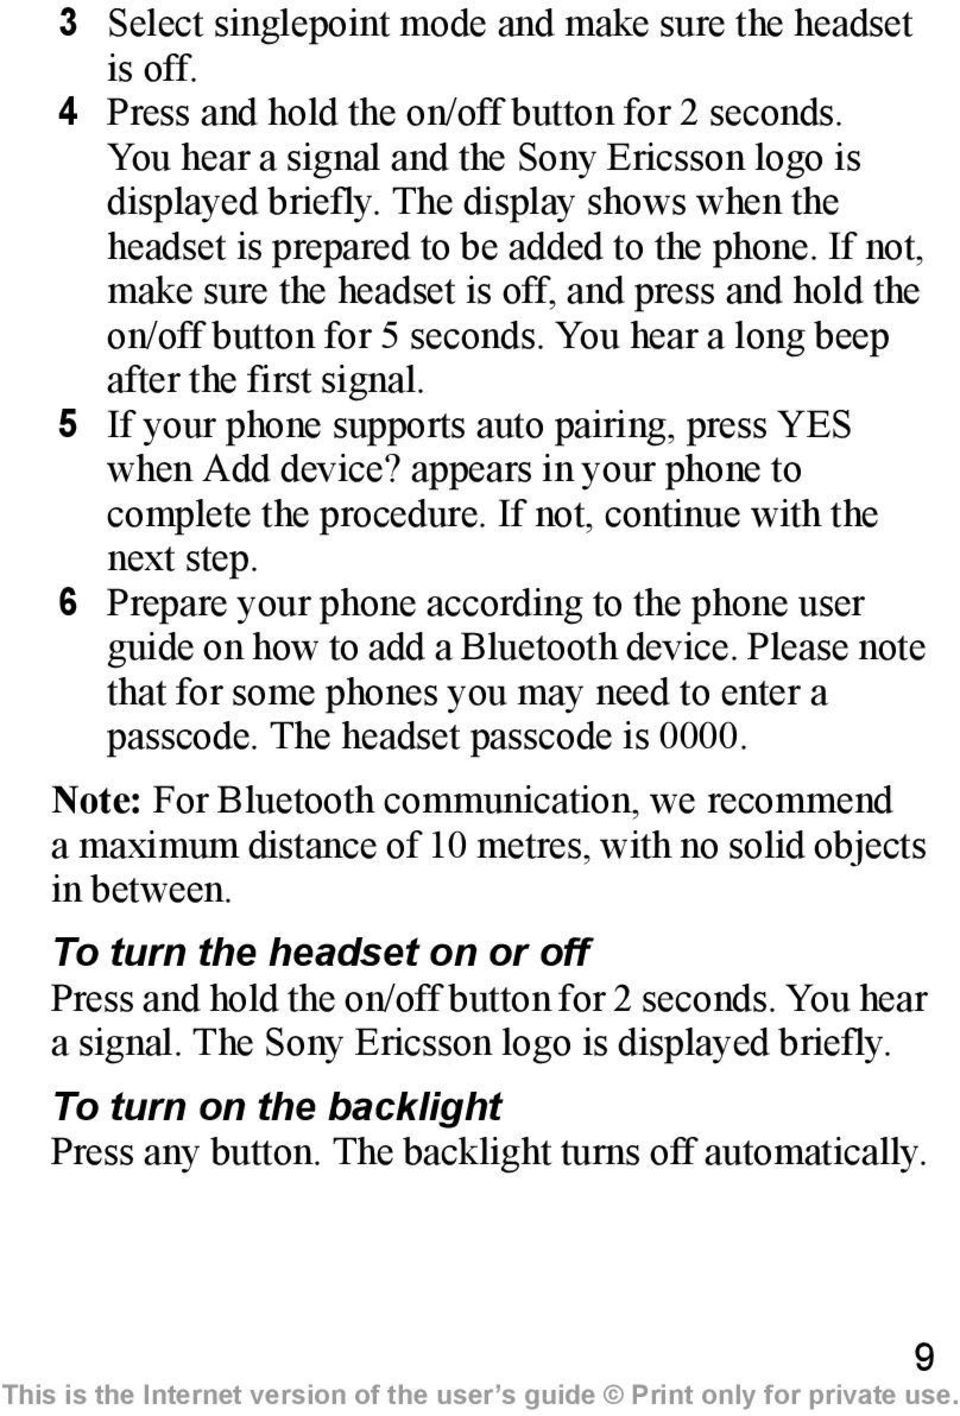 You hear a long beep after the first signal. 5 If your phone supports auto pairing, press YES when Add device? appears in your phone to complete the procedure. If not, continue with the next step.